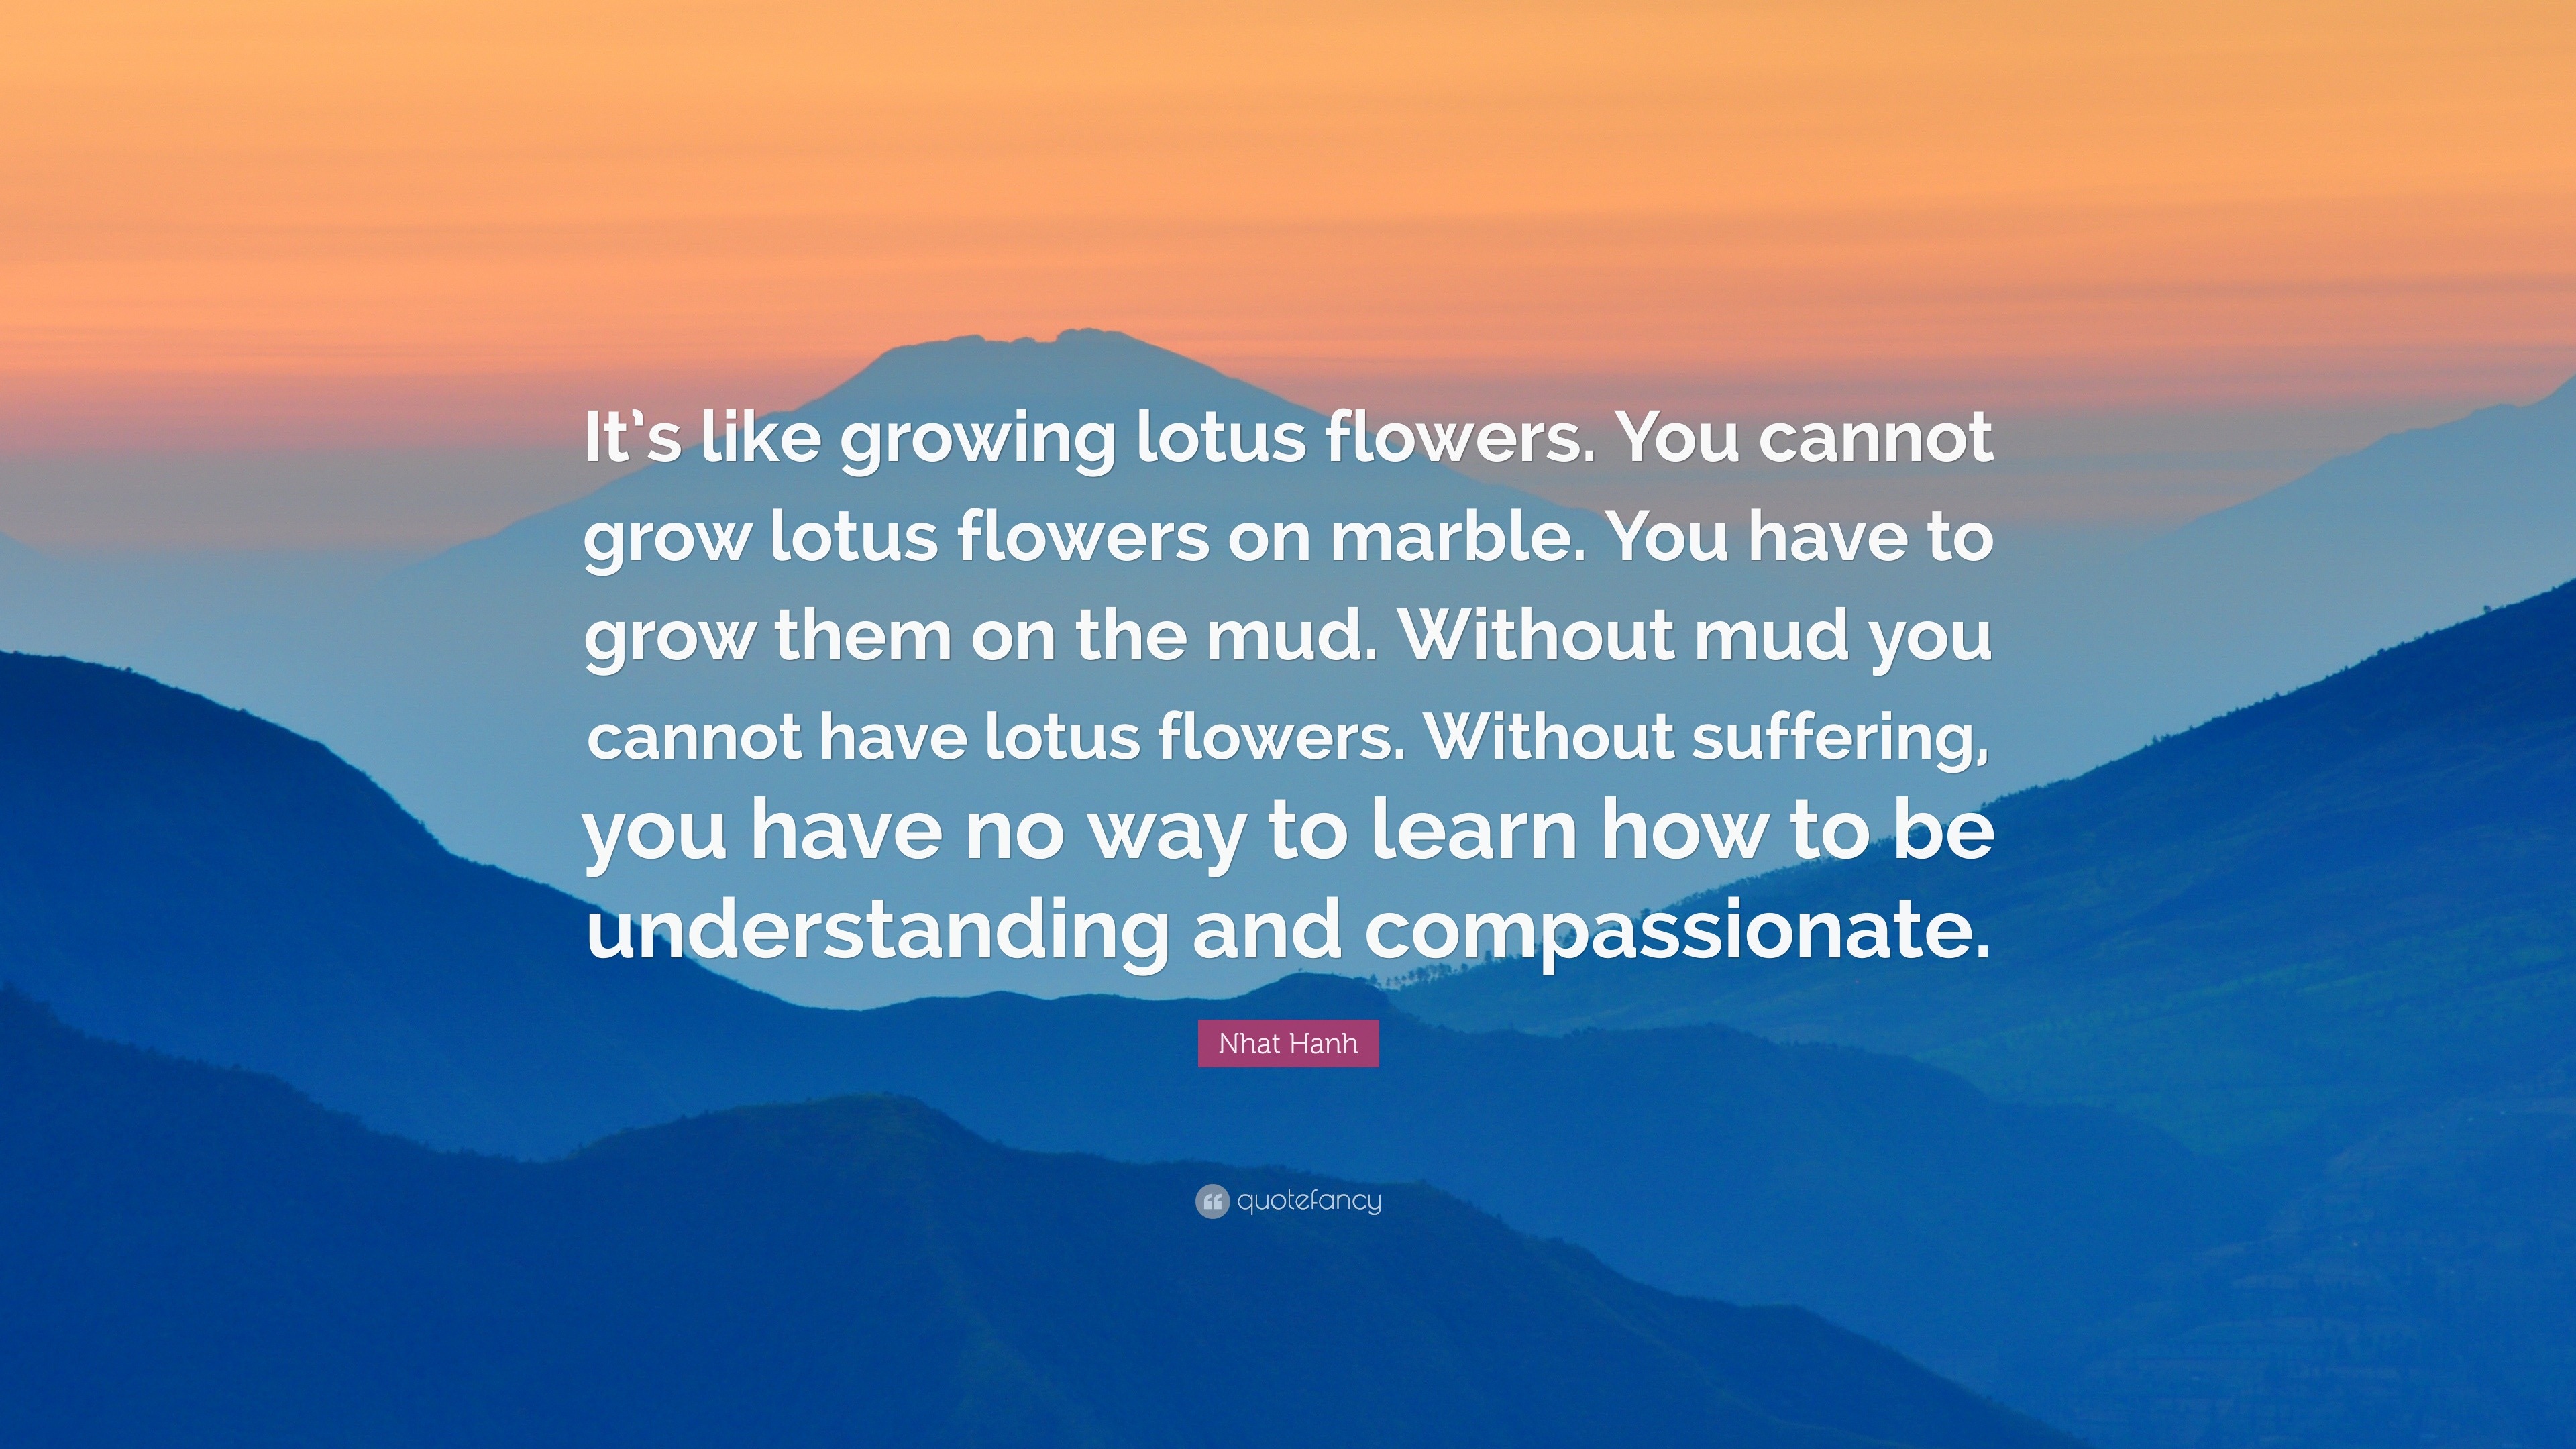 Nhat Hanh Quote: “It’s like growing lotus flowers. You cannot grow ...